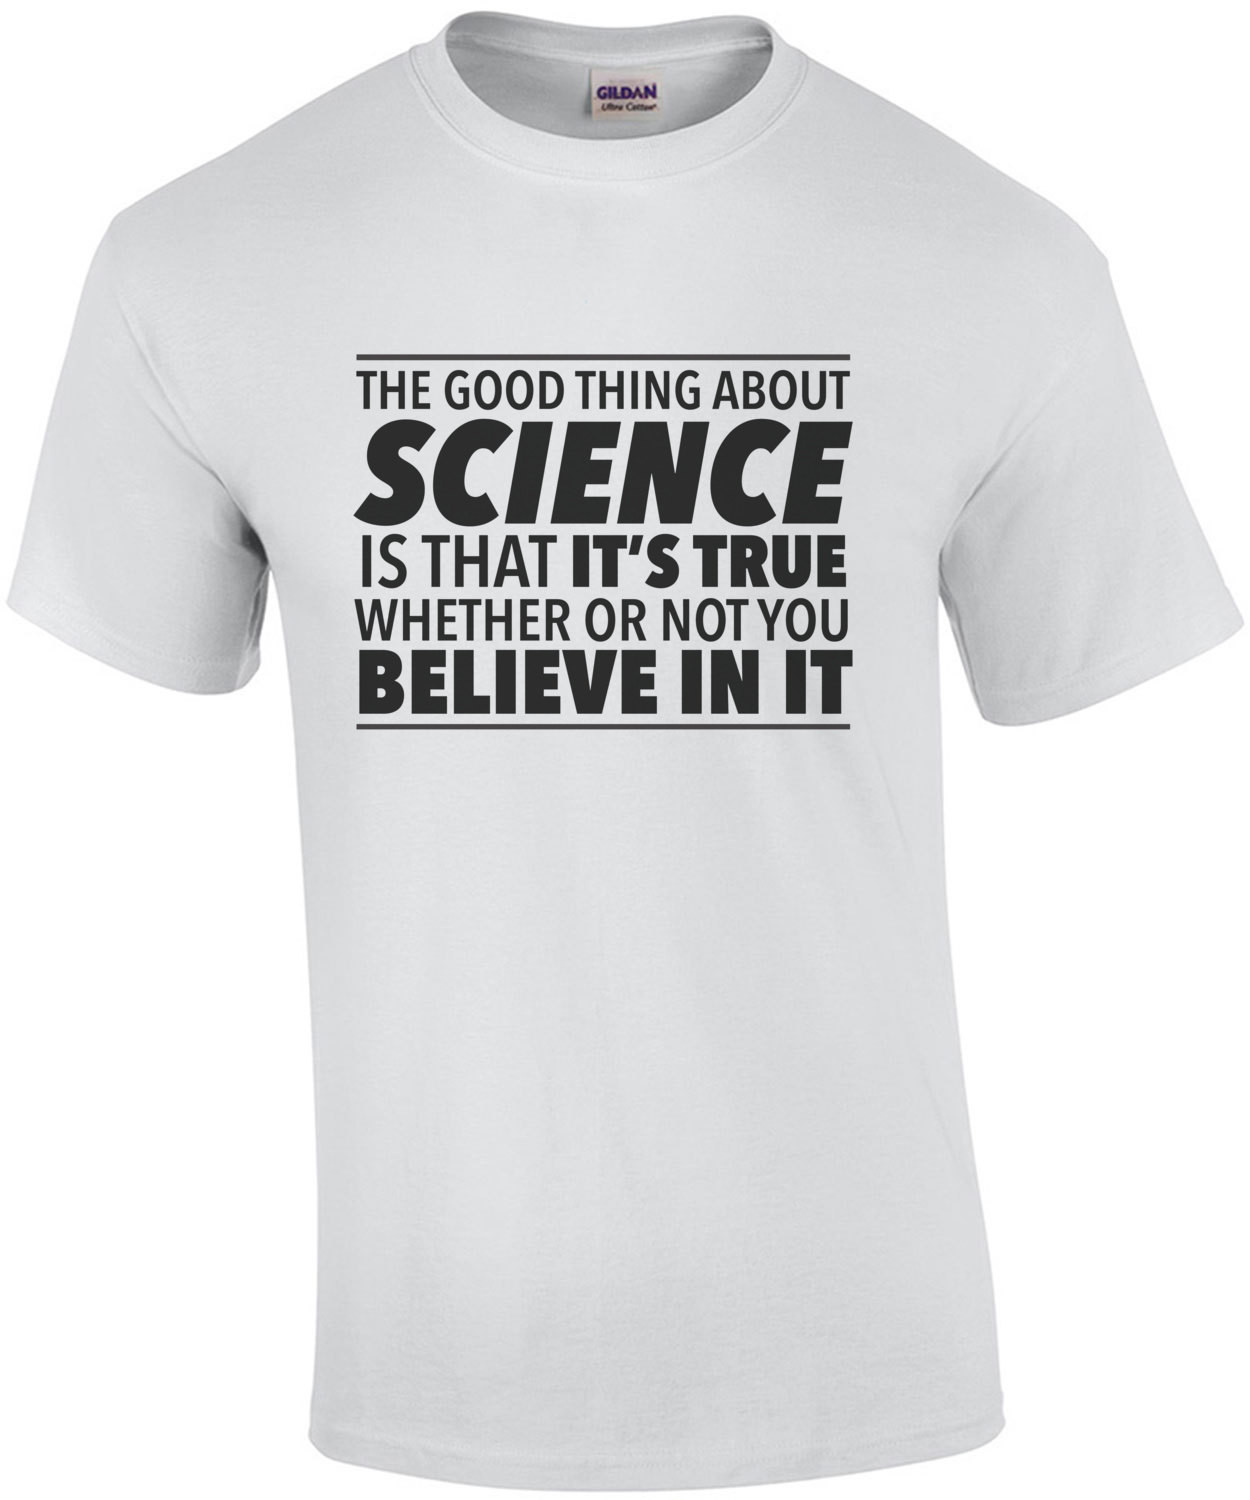 The good thing about science is that it's true whether or not you believe in it - funny science t-shirt